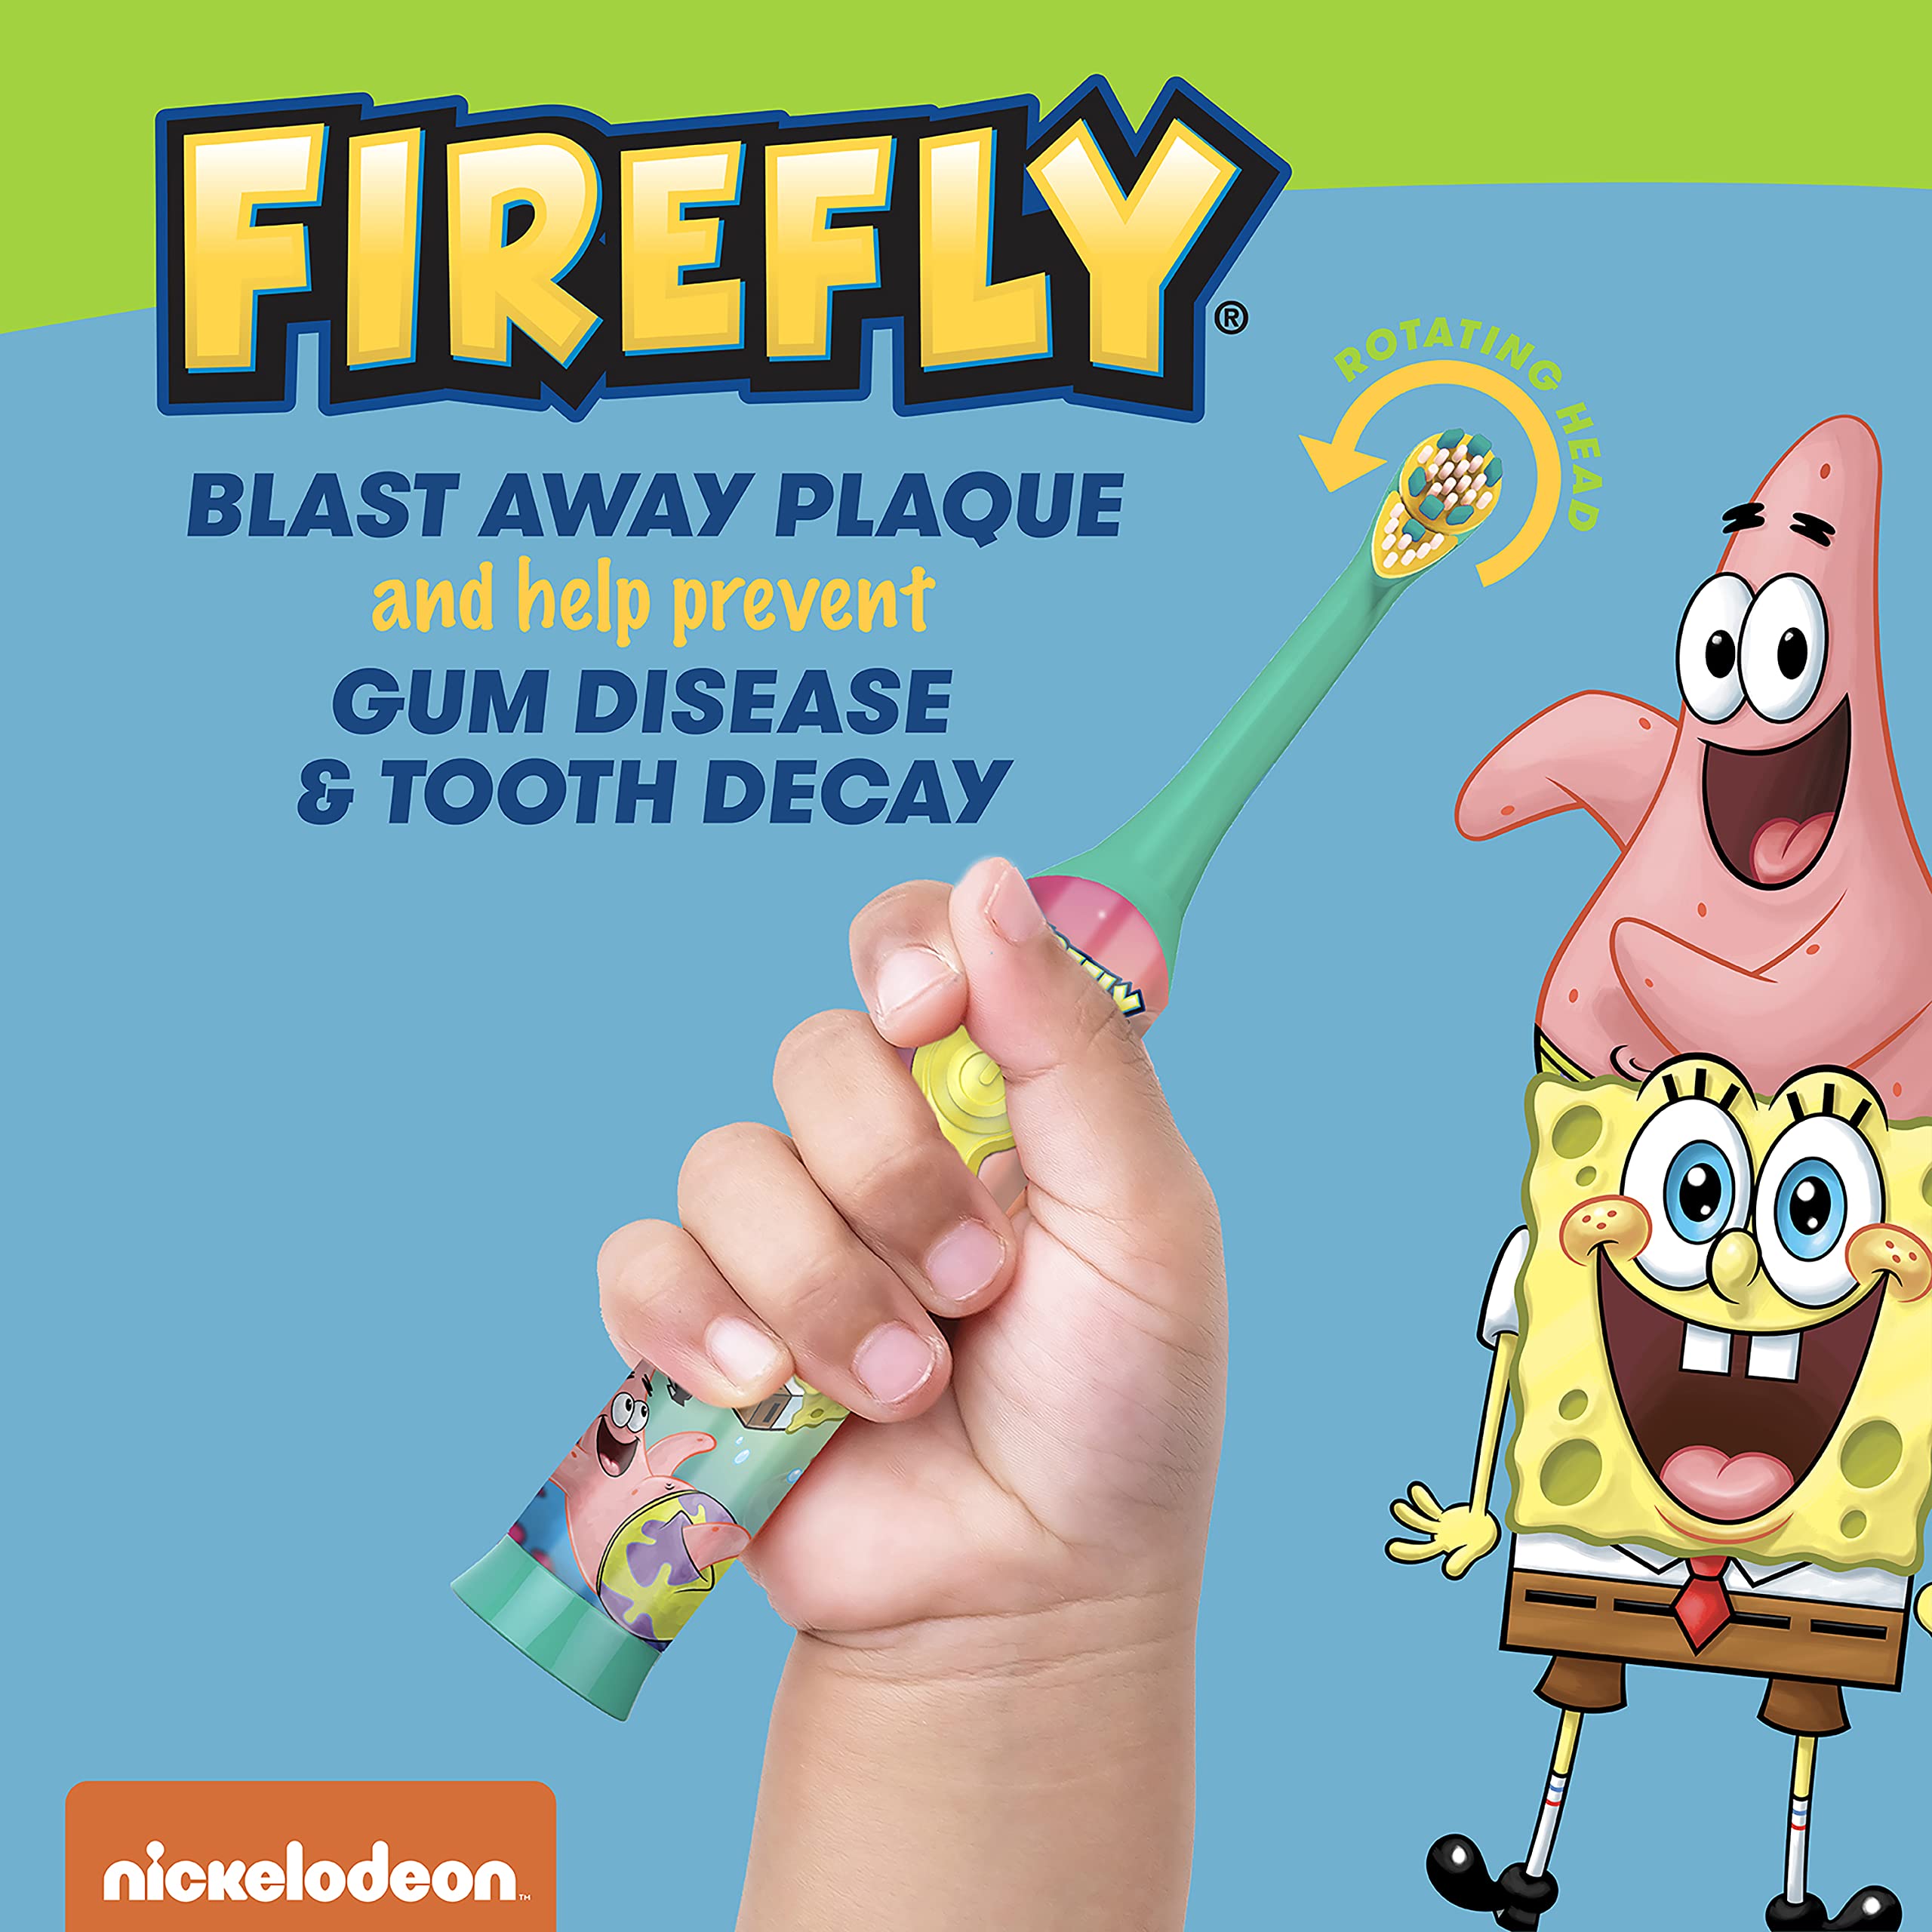 FIREFLY Clean N' Protect, Spongebob Squarepants Toothbrush with 3D hygienic Character Cover, Soft Compact Brush Head, Ergonomic Handles for Small Hands, Battery Included, Ages 3+, 1 Count